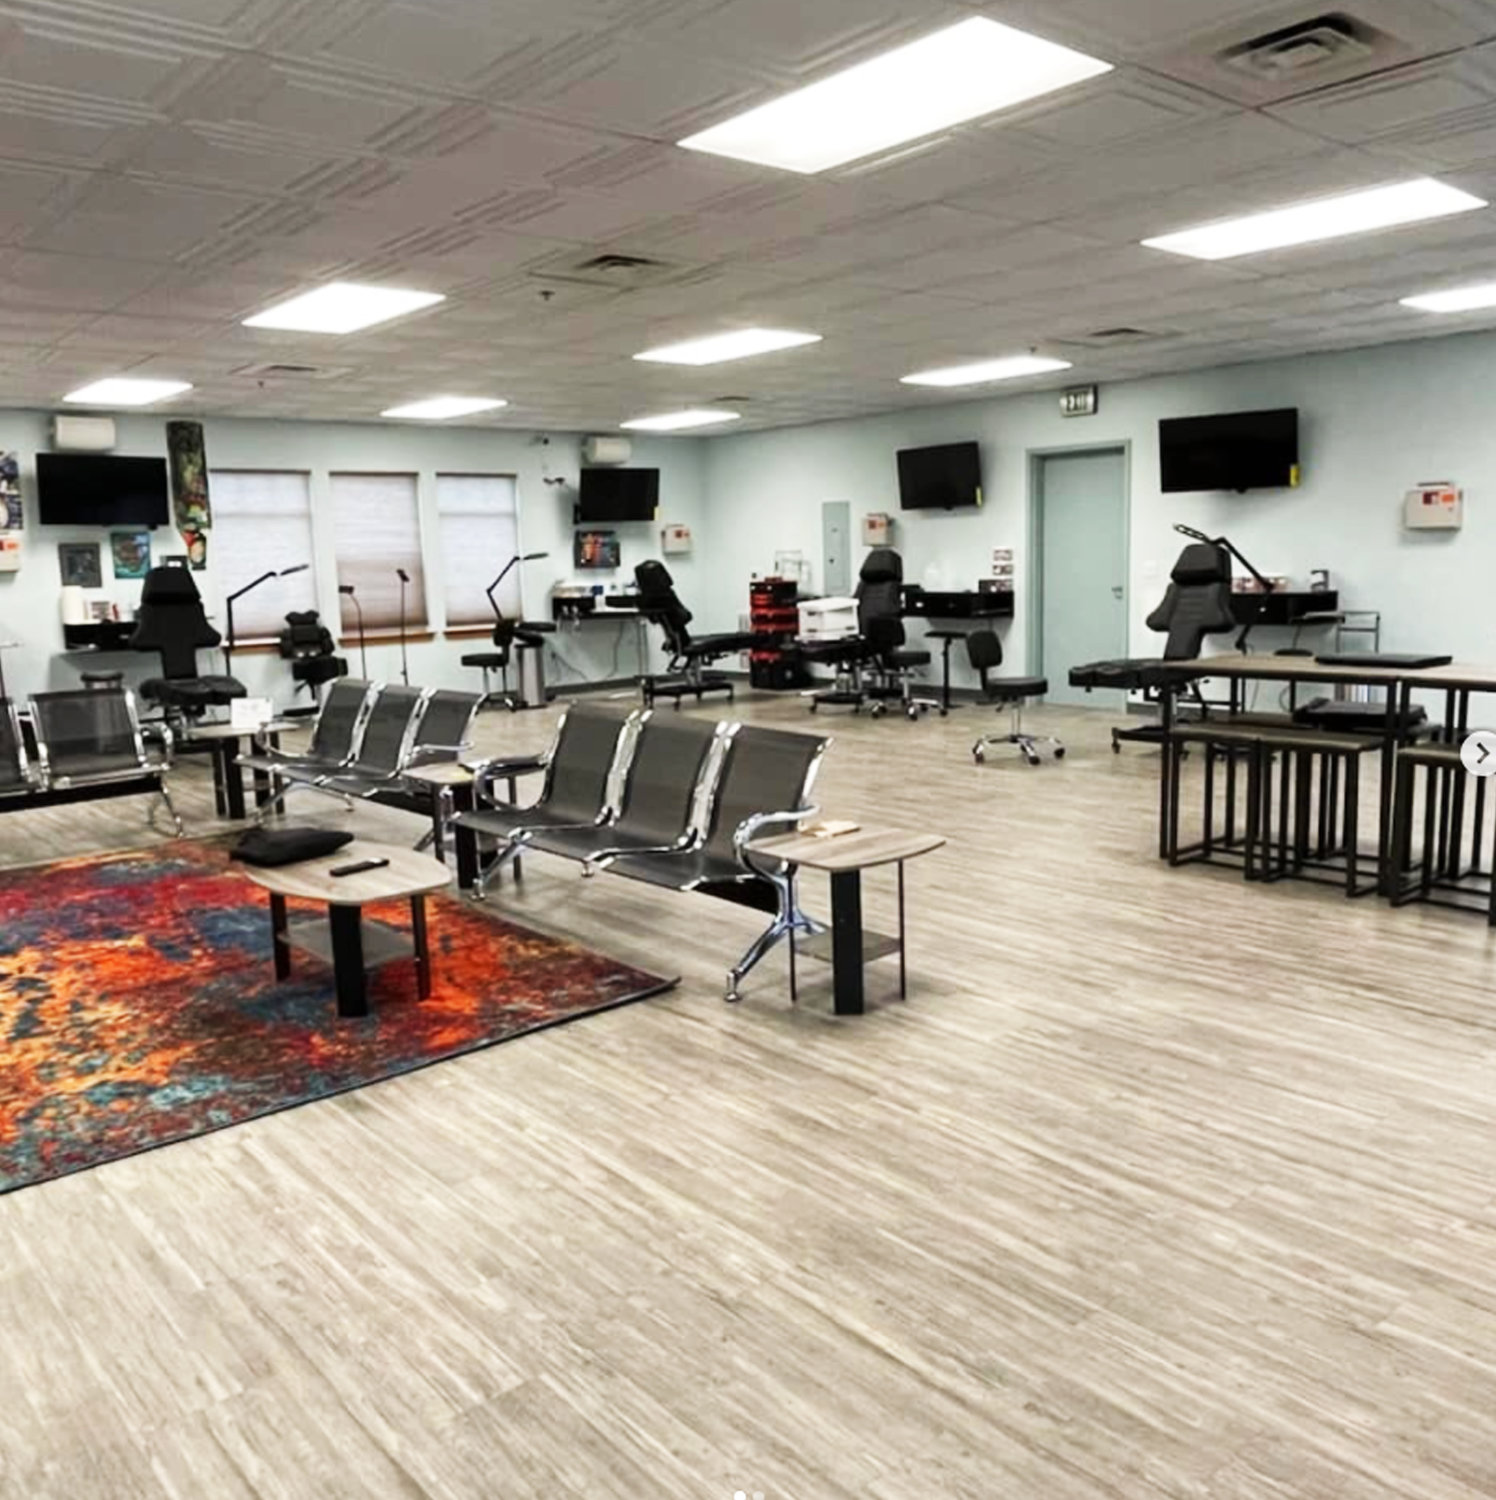 The Yelm-based Dancing Needles Tattoo Studio has an open and bright floor plan for its customers.